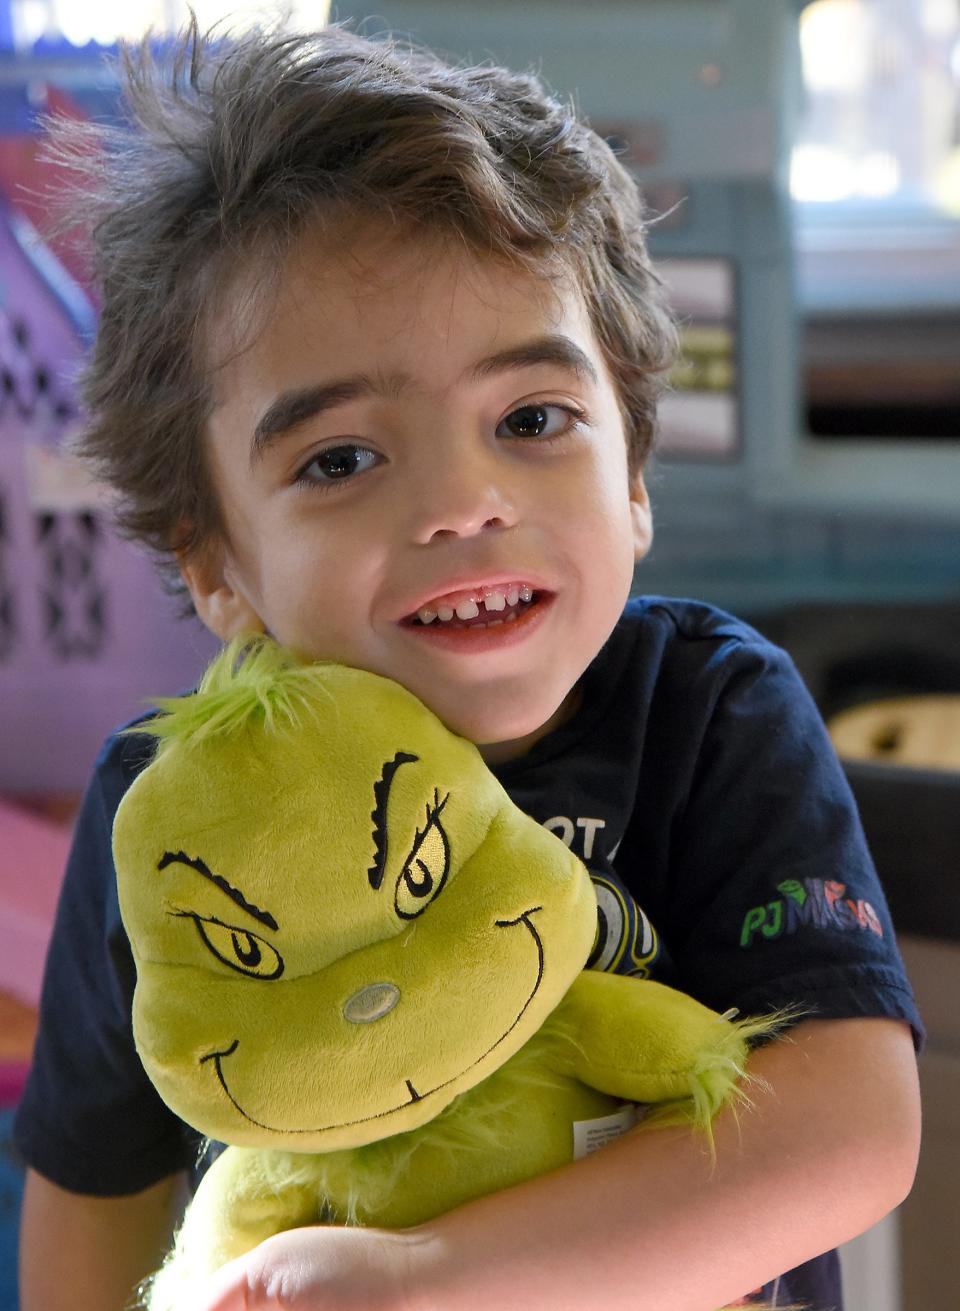 Elliott Althouse, of Monroe, who turns 5 years old today, hugs the Grinch toy he brought home from the family's Make-A-Wish vacation in Walt Disney World. The theme for his birthday party is the Grinch. Elliott is dealing with a very rare syndrome called Lennox-Gastaut Syndrome, a lifelong and aggressive form of epilepsy.